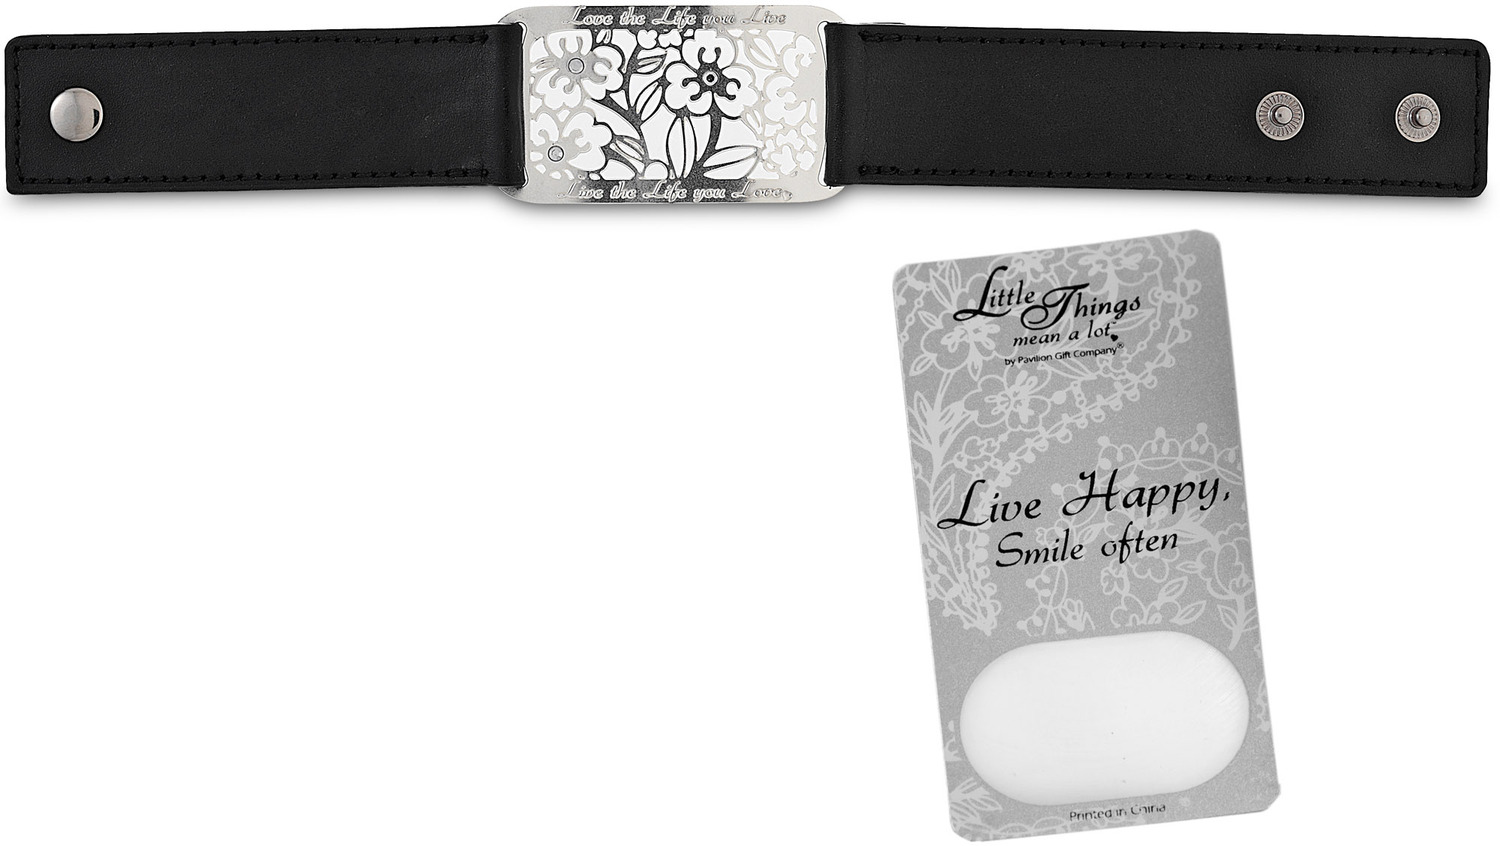 Love the Life... Bracelet by Little Things Mean A Lot - Love the Life... Bracelet - 8.5" x 1" Black Leather